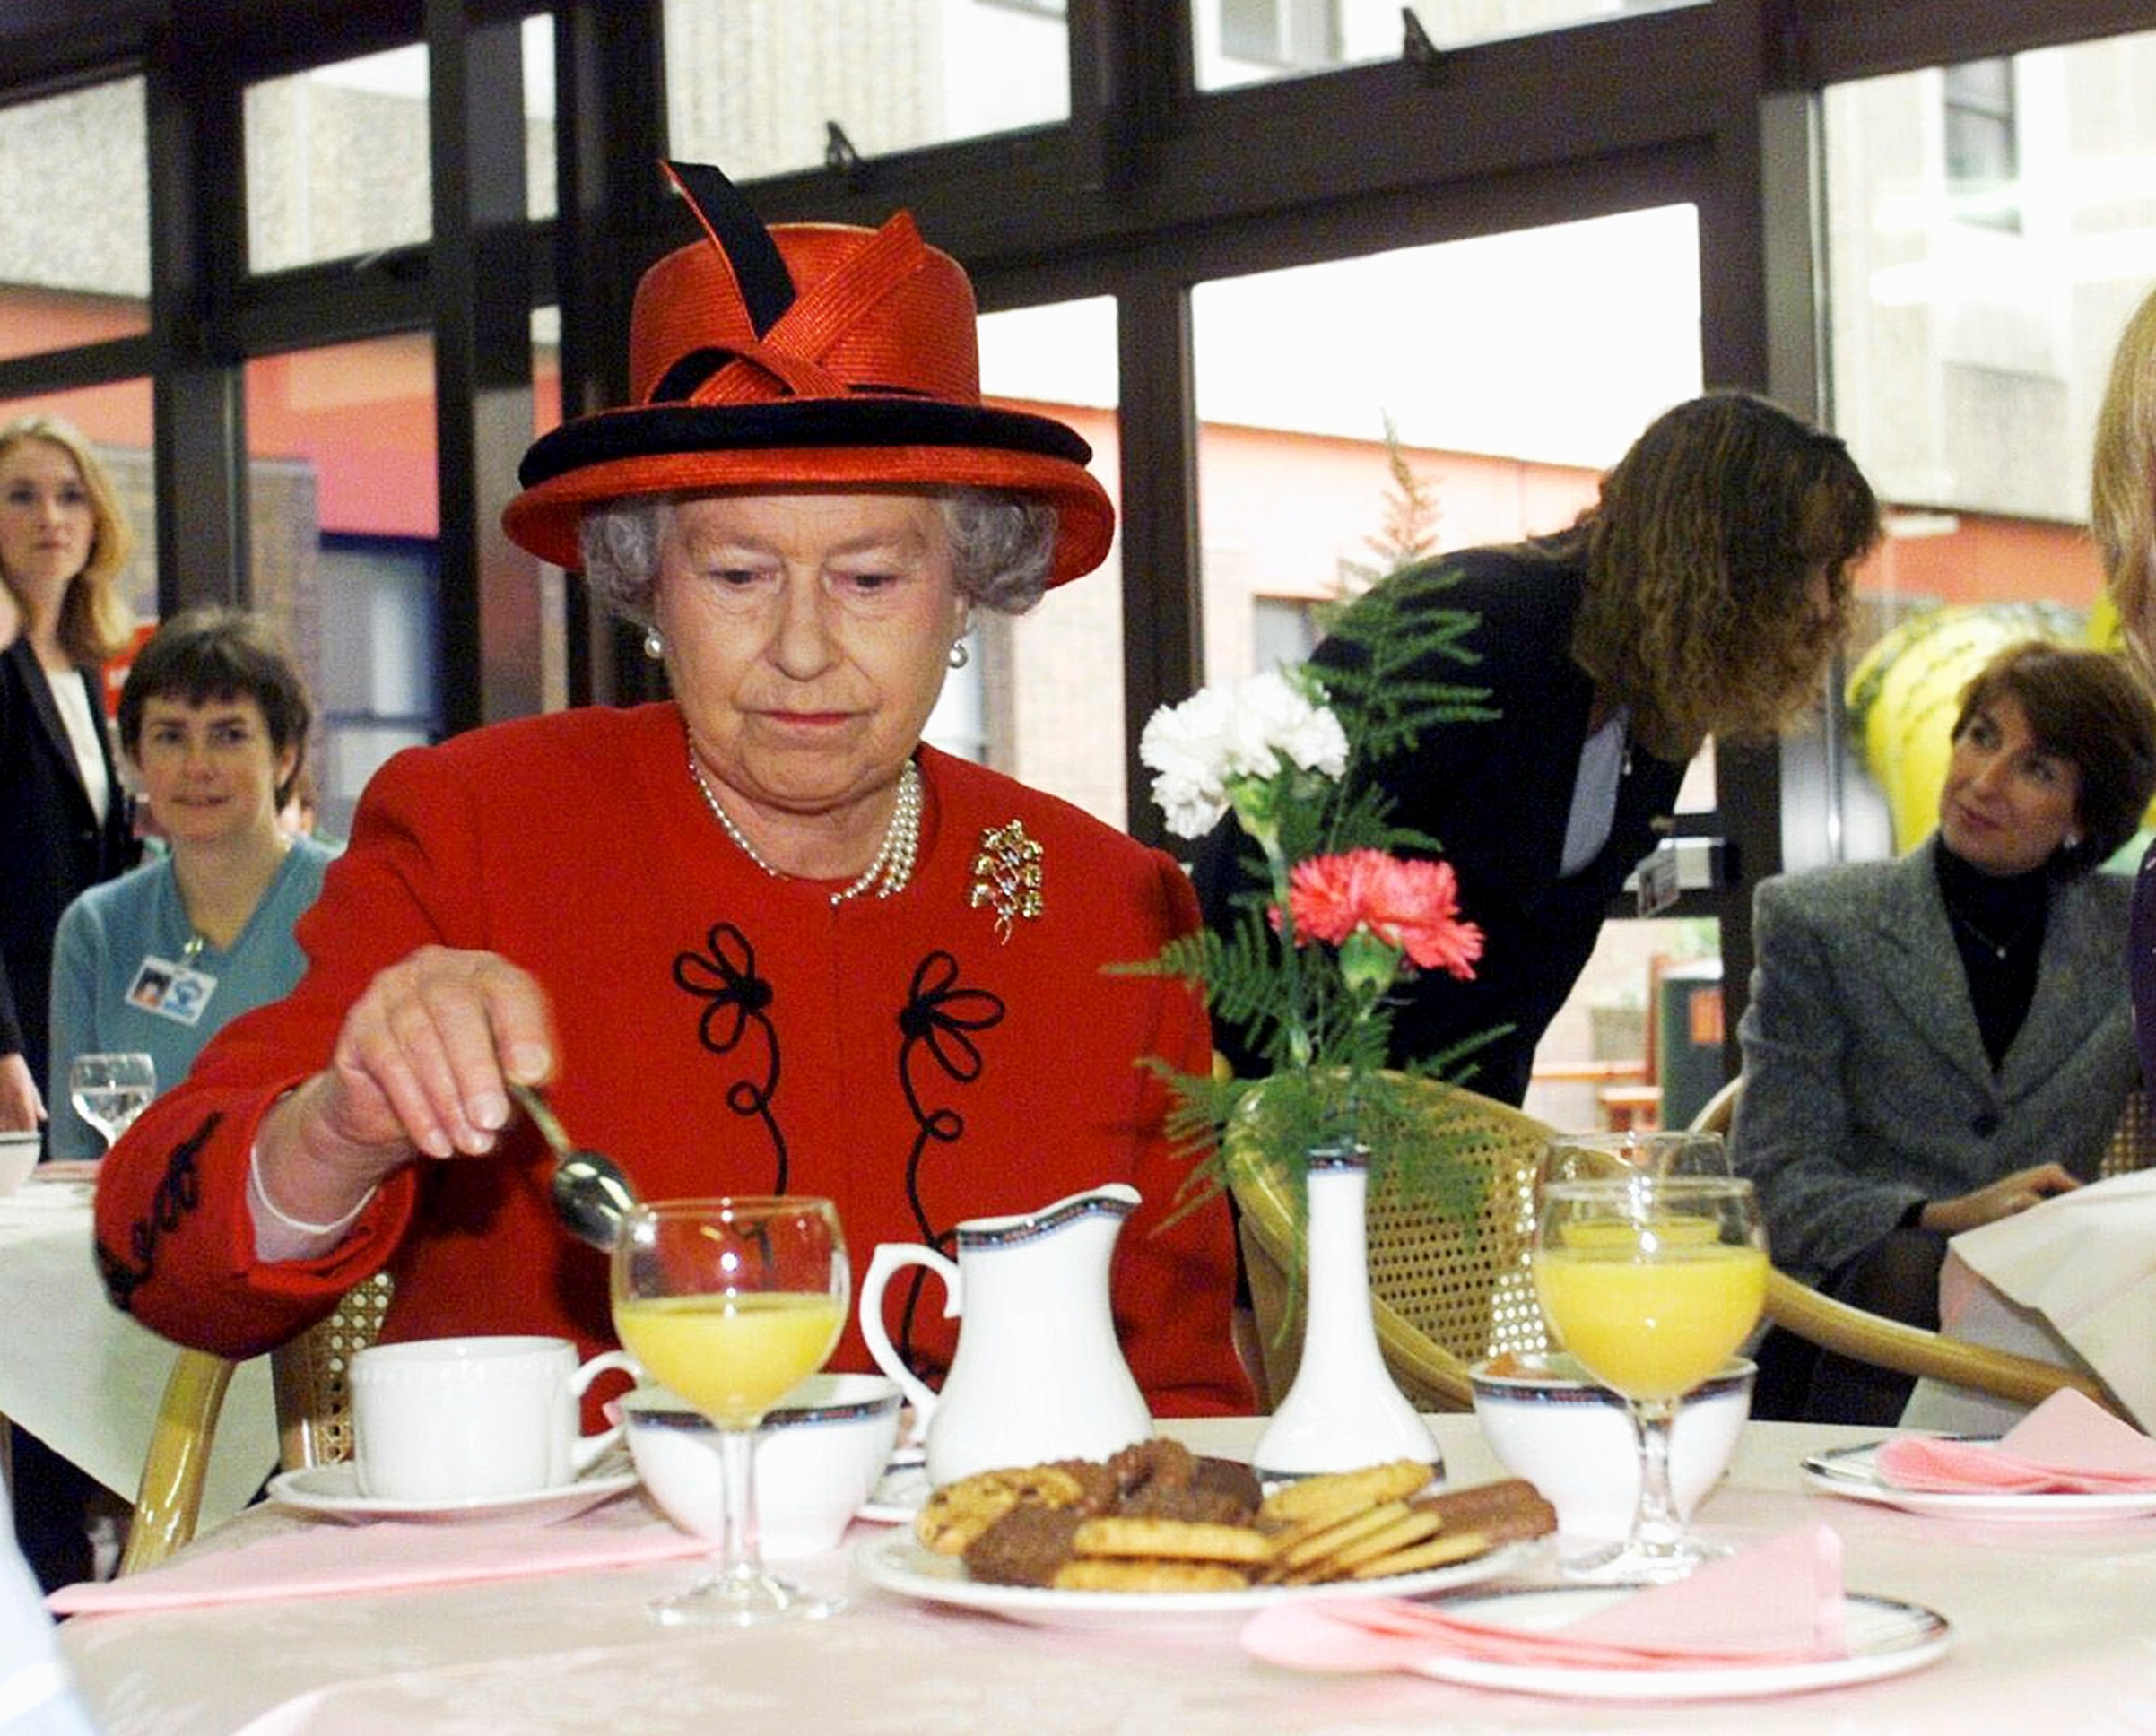 Queen Elizabeth II wears a red dress and holds a spoon inside the food house